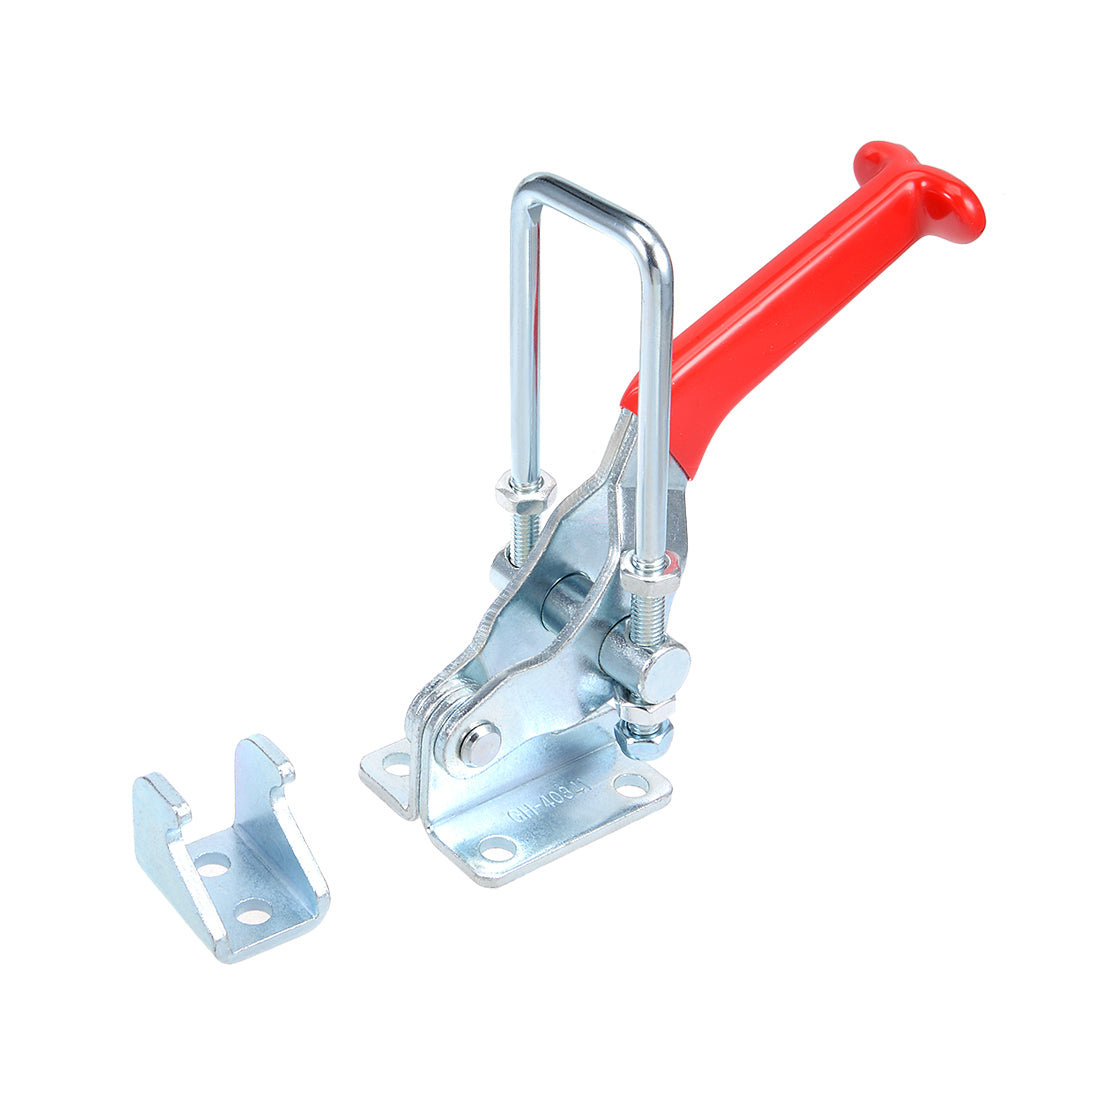 uxcell Uxcell Toggle Latch Clamp 900Kg 1980lbs Capacity Pull Action Adjustable Latch GH-40341